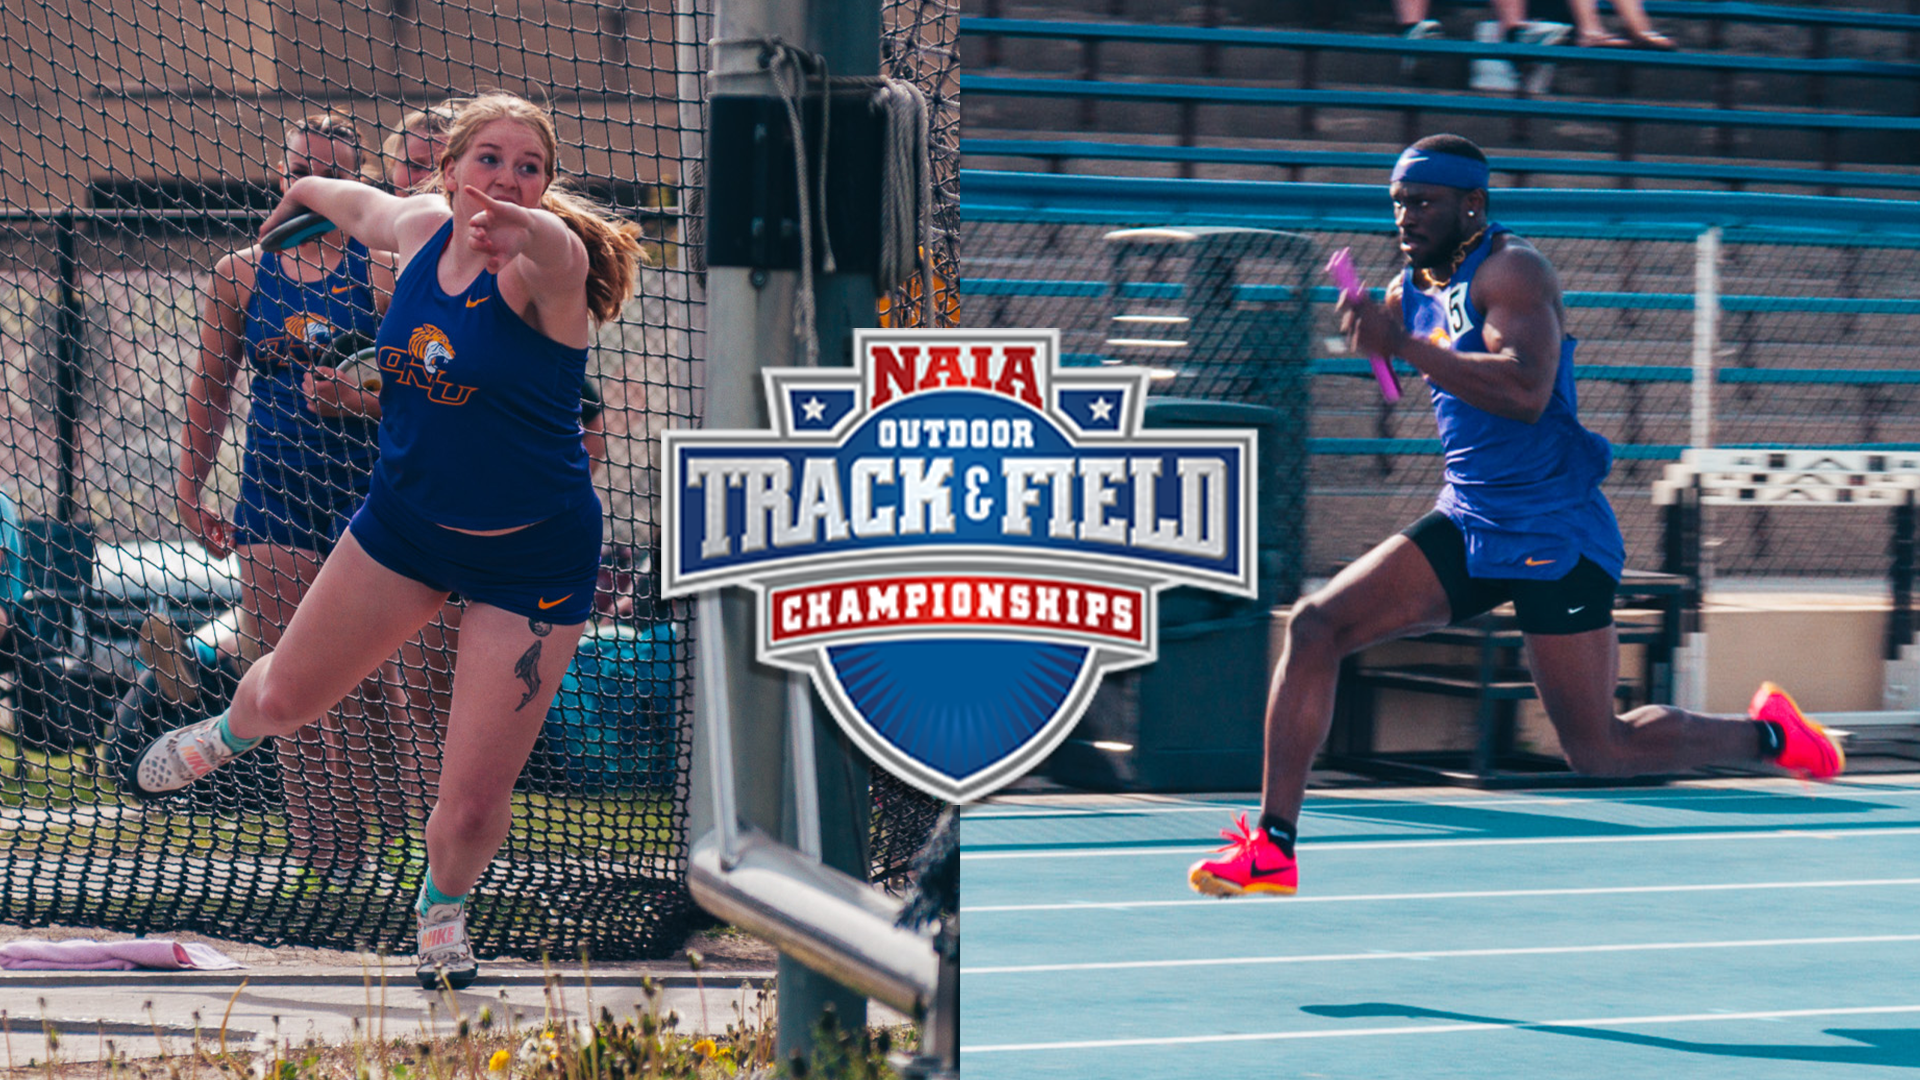 LIVE UPDATES FROM NAIA OUTDOOR TRACK &amp; FIELD CHAMPIONSHIPS